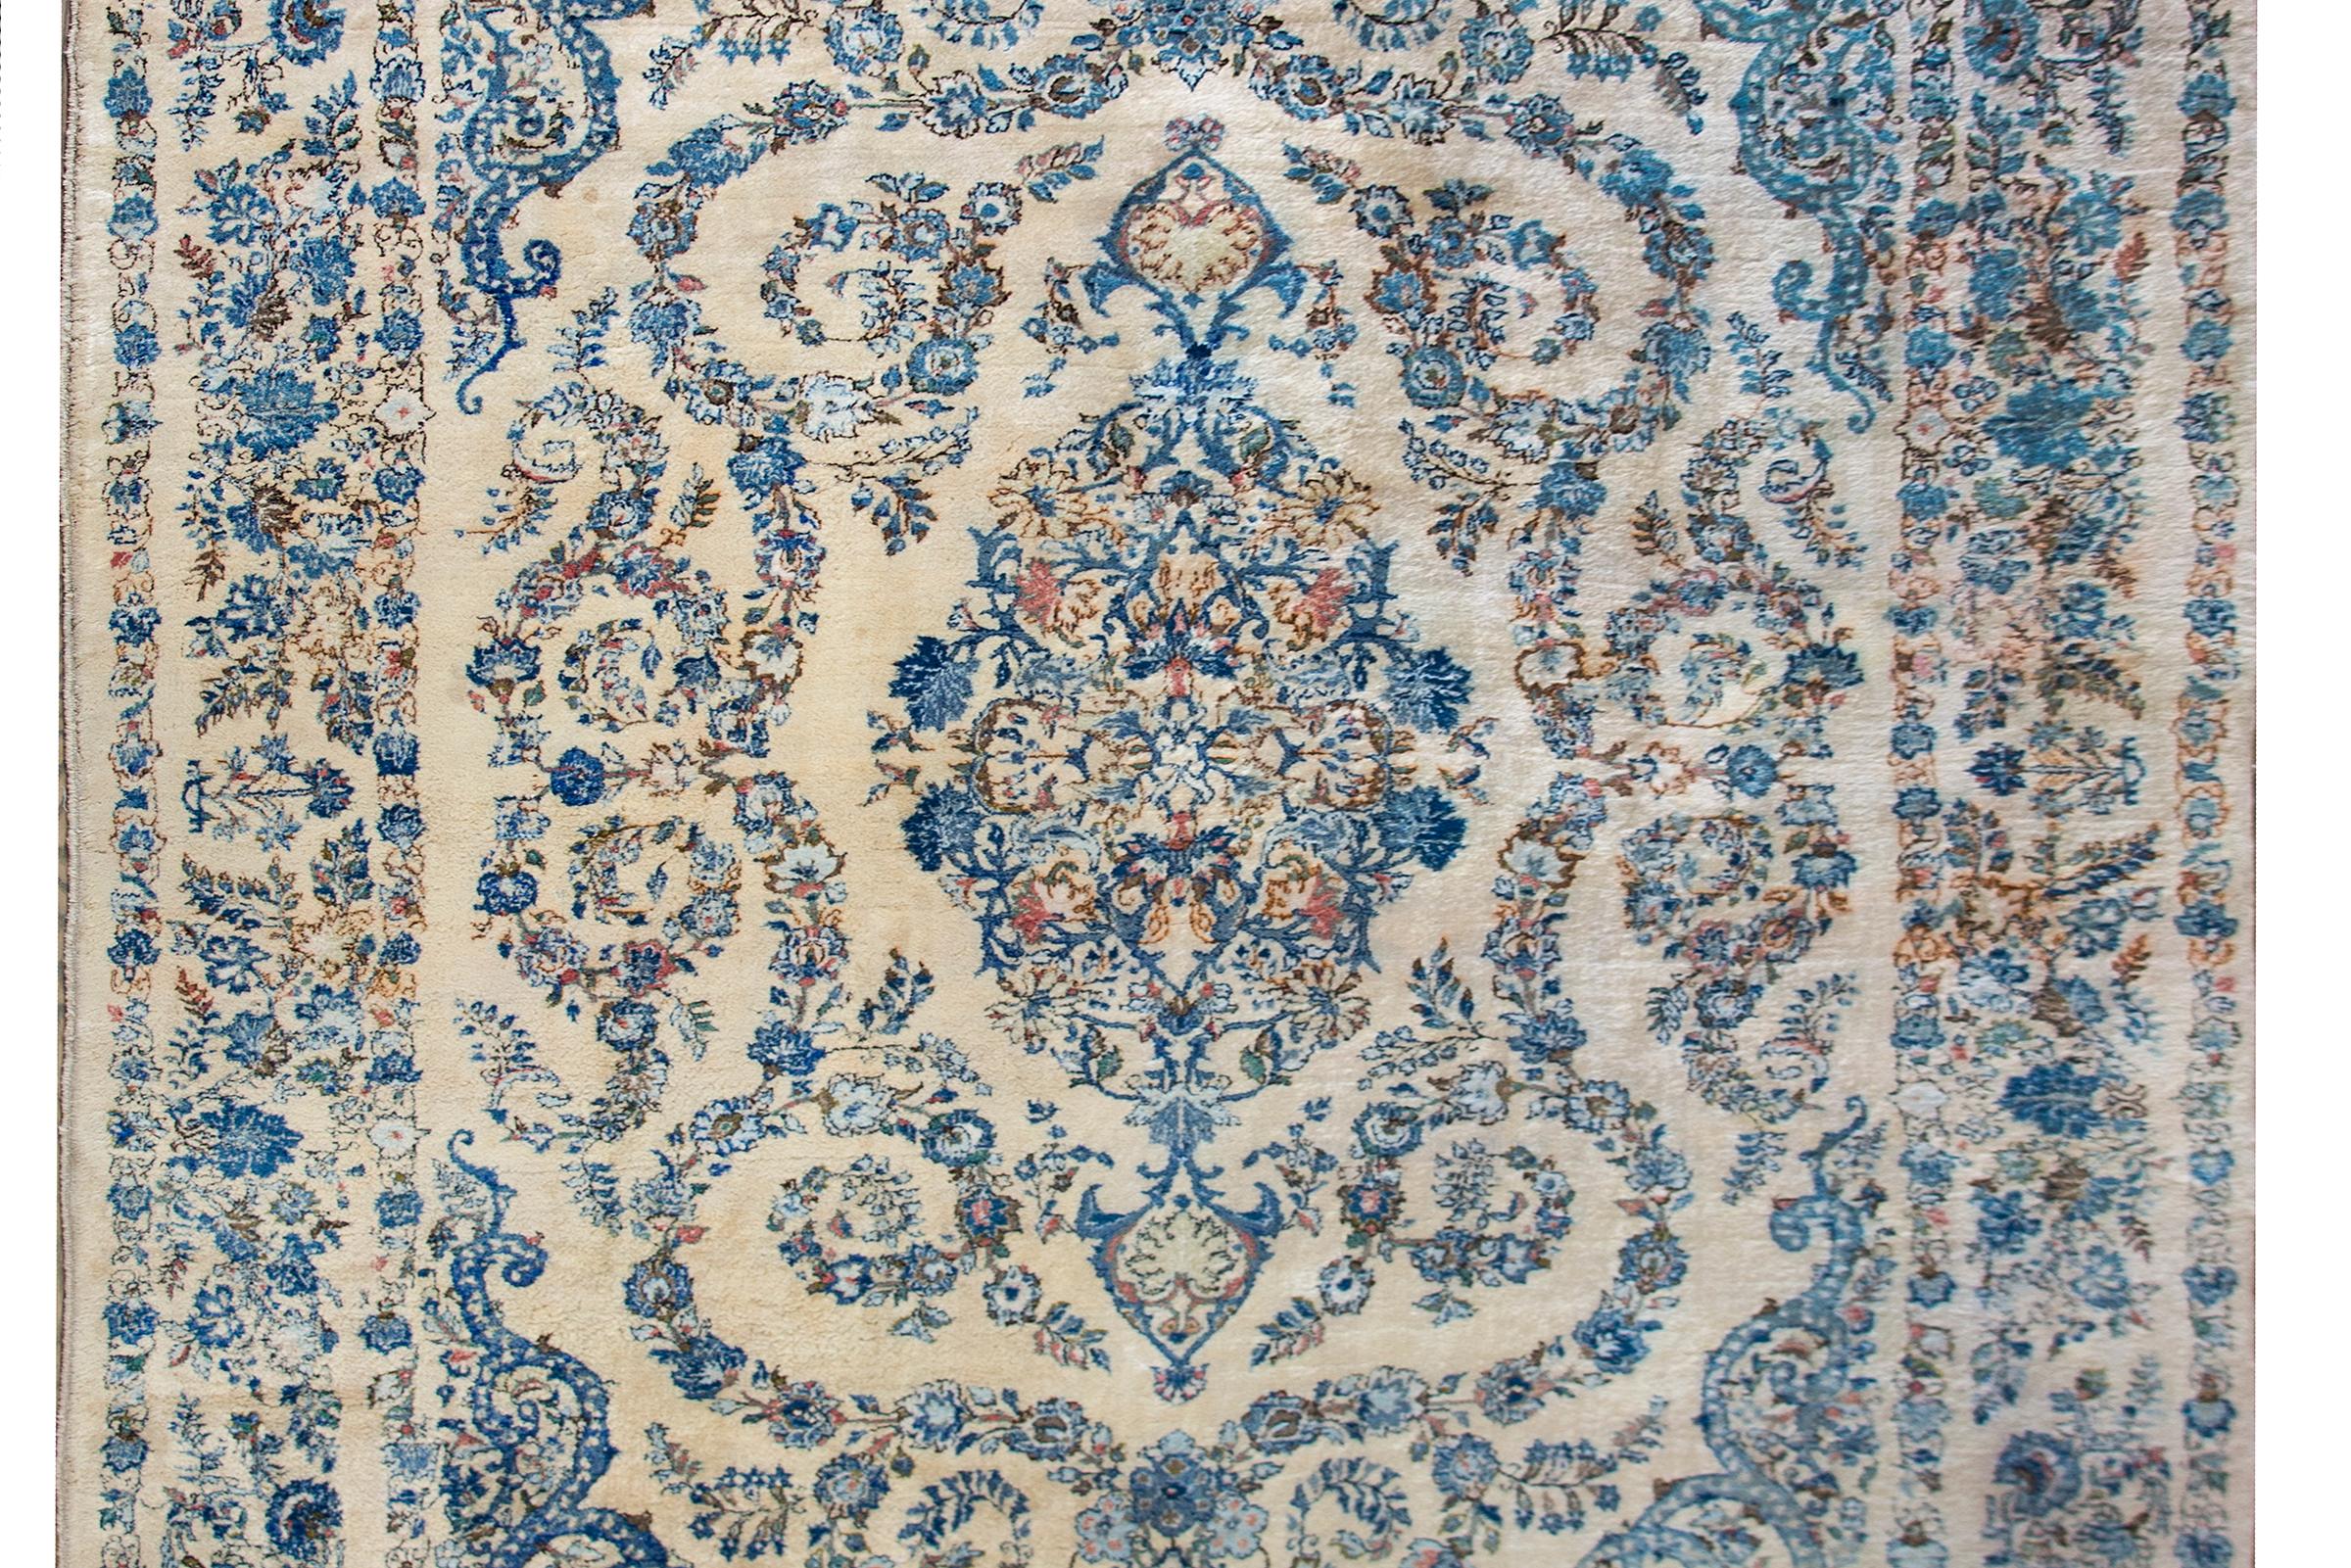 A beautiful mid-20th century Persian Kashmir rug with a large central floral medallion amidst a field of more flowers and surrounded by a border of even more flowers, all woven in light and dark indigo, pink, green, and white set against an ivory